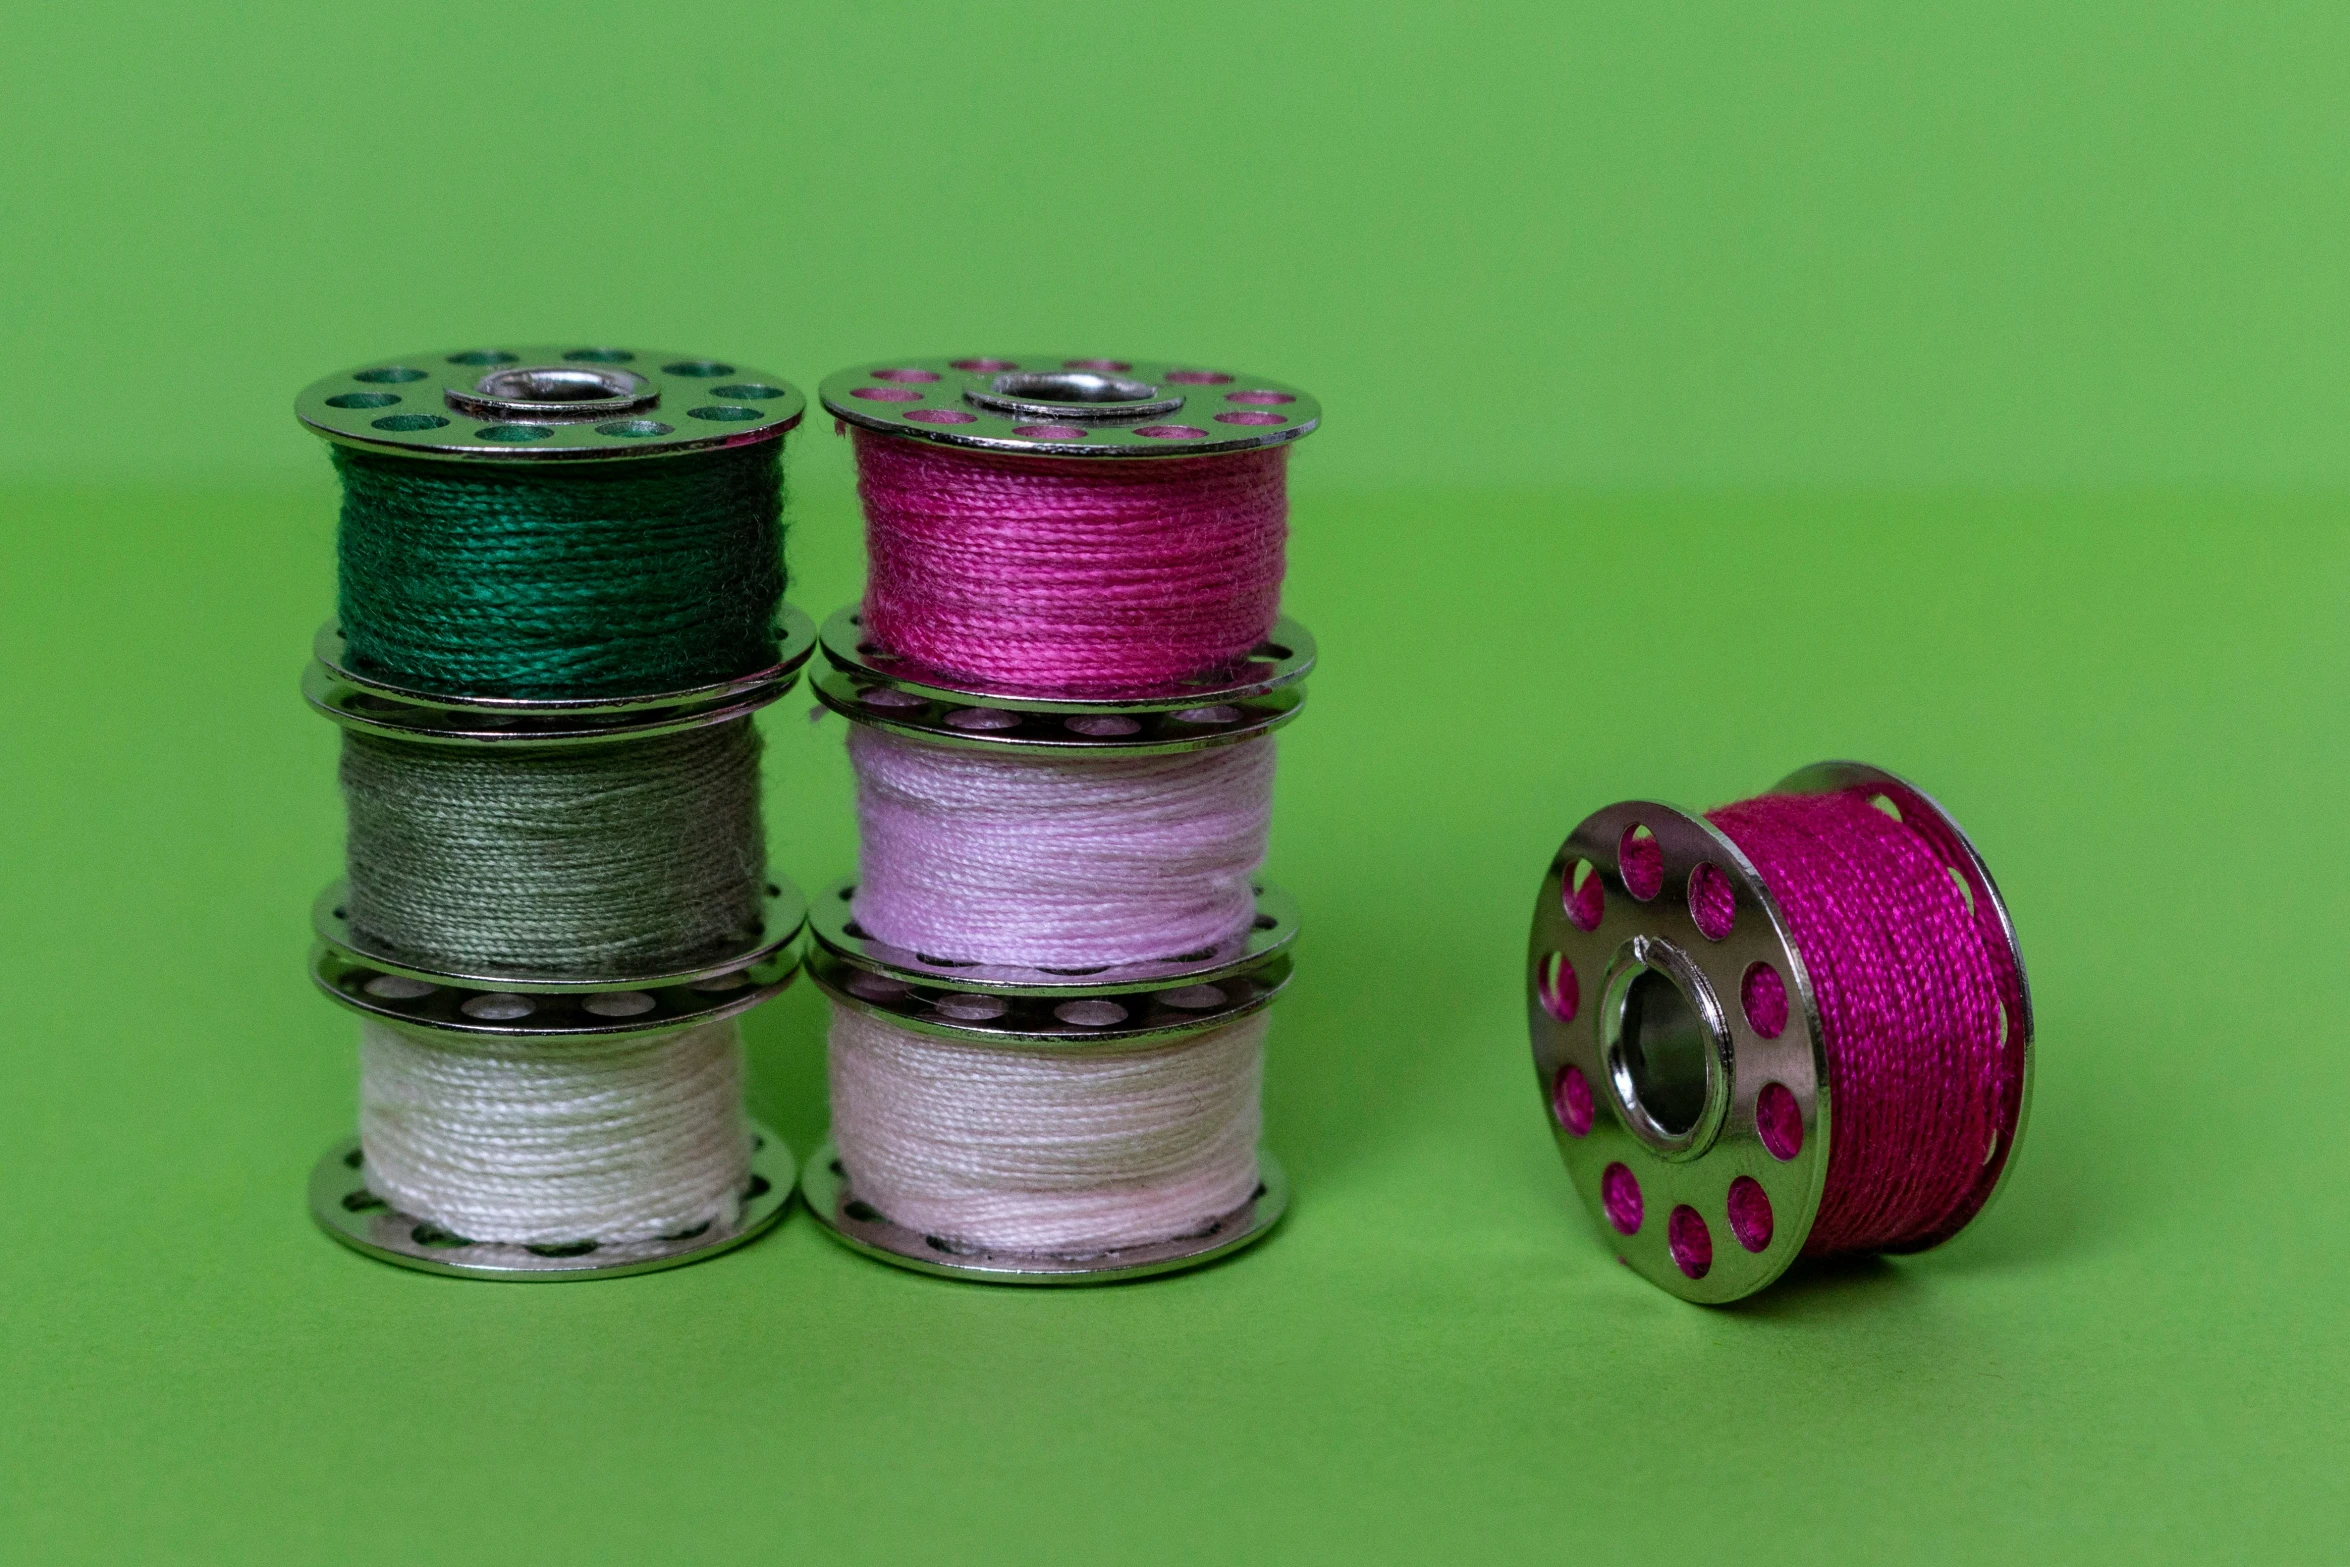 four spooles of thread on a green background